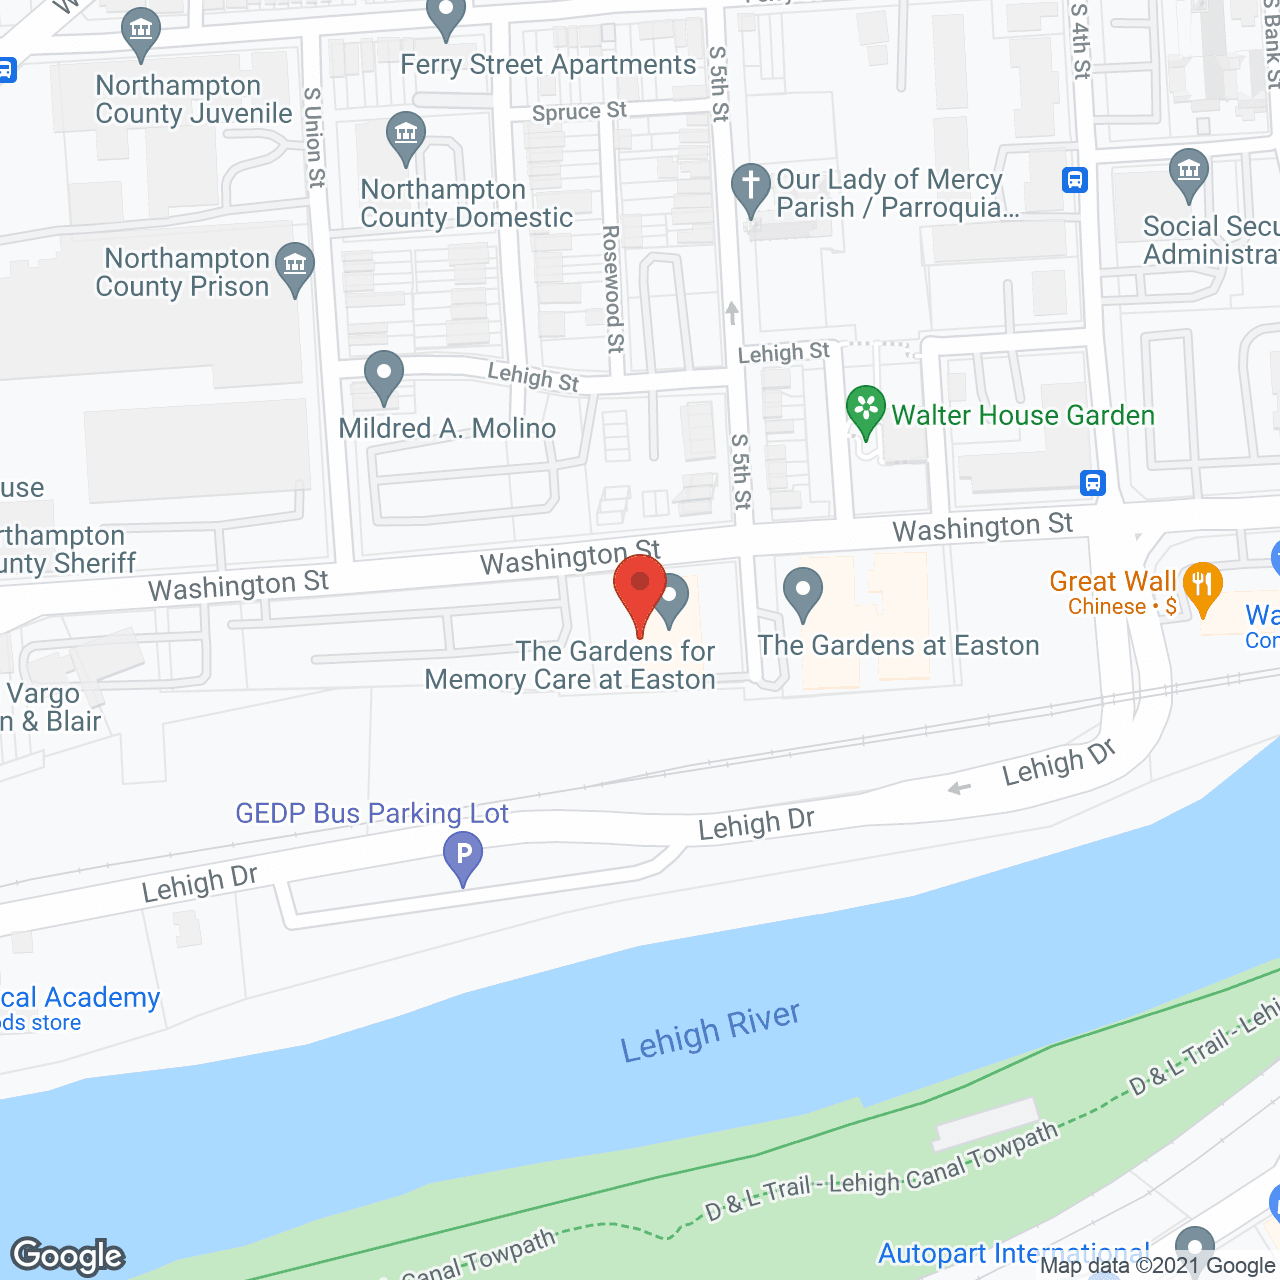 Praxis in google map